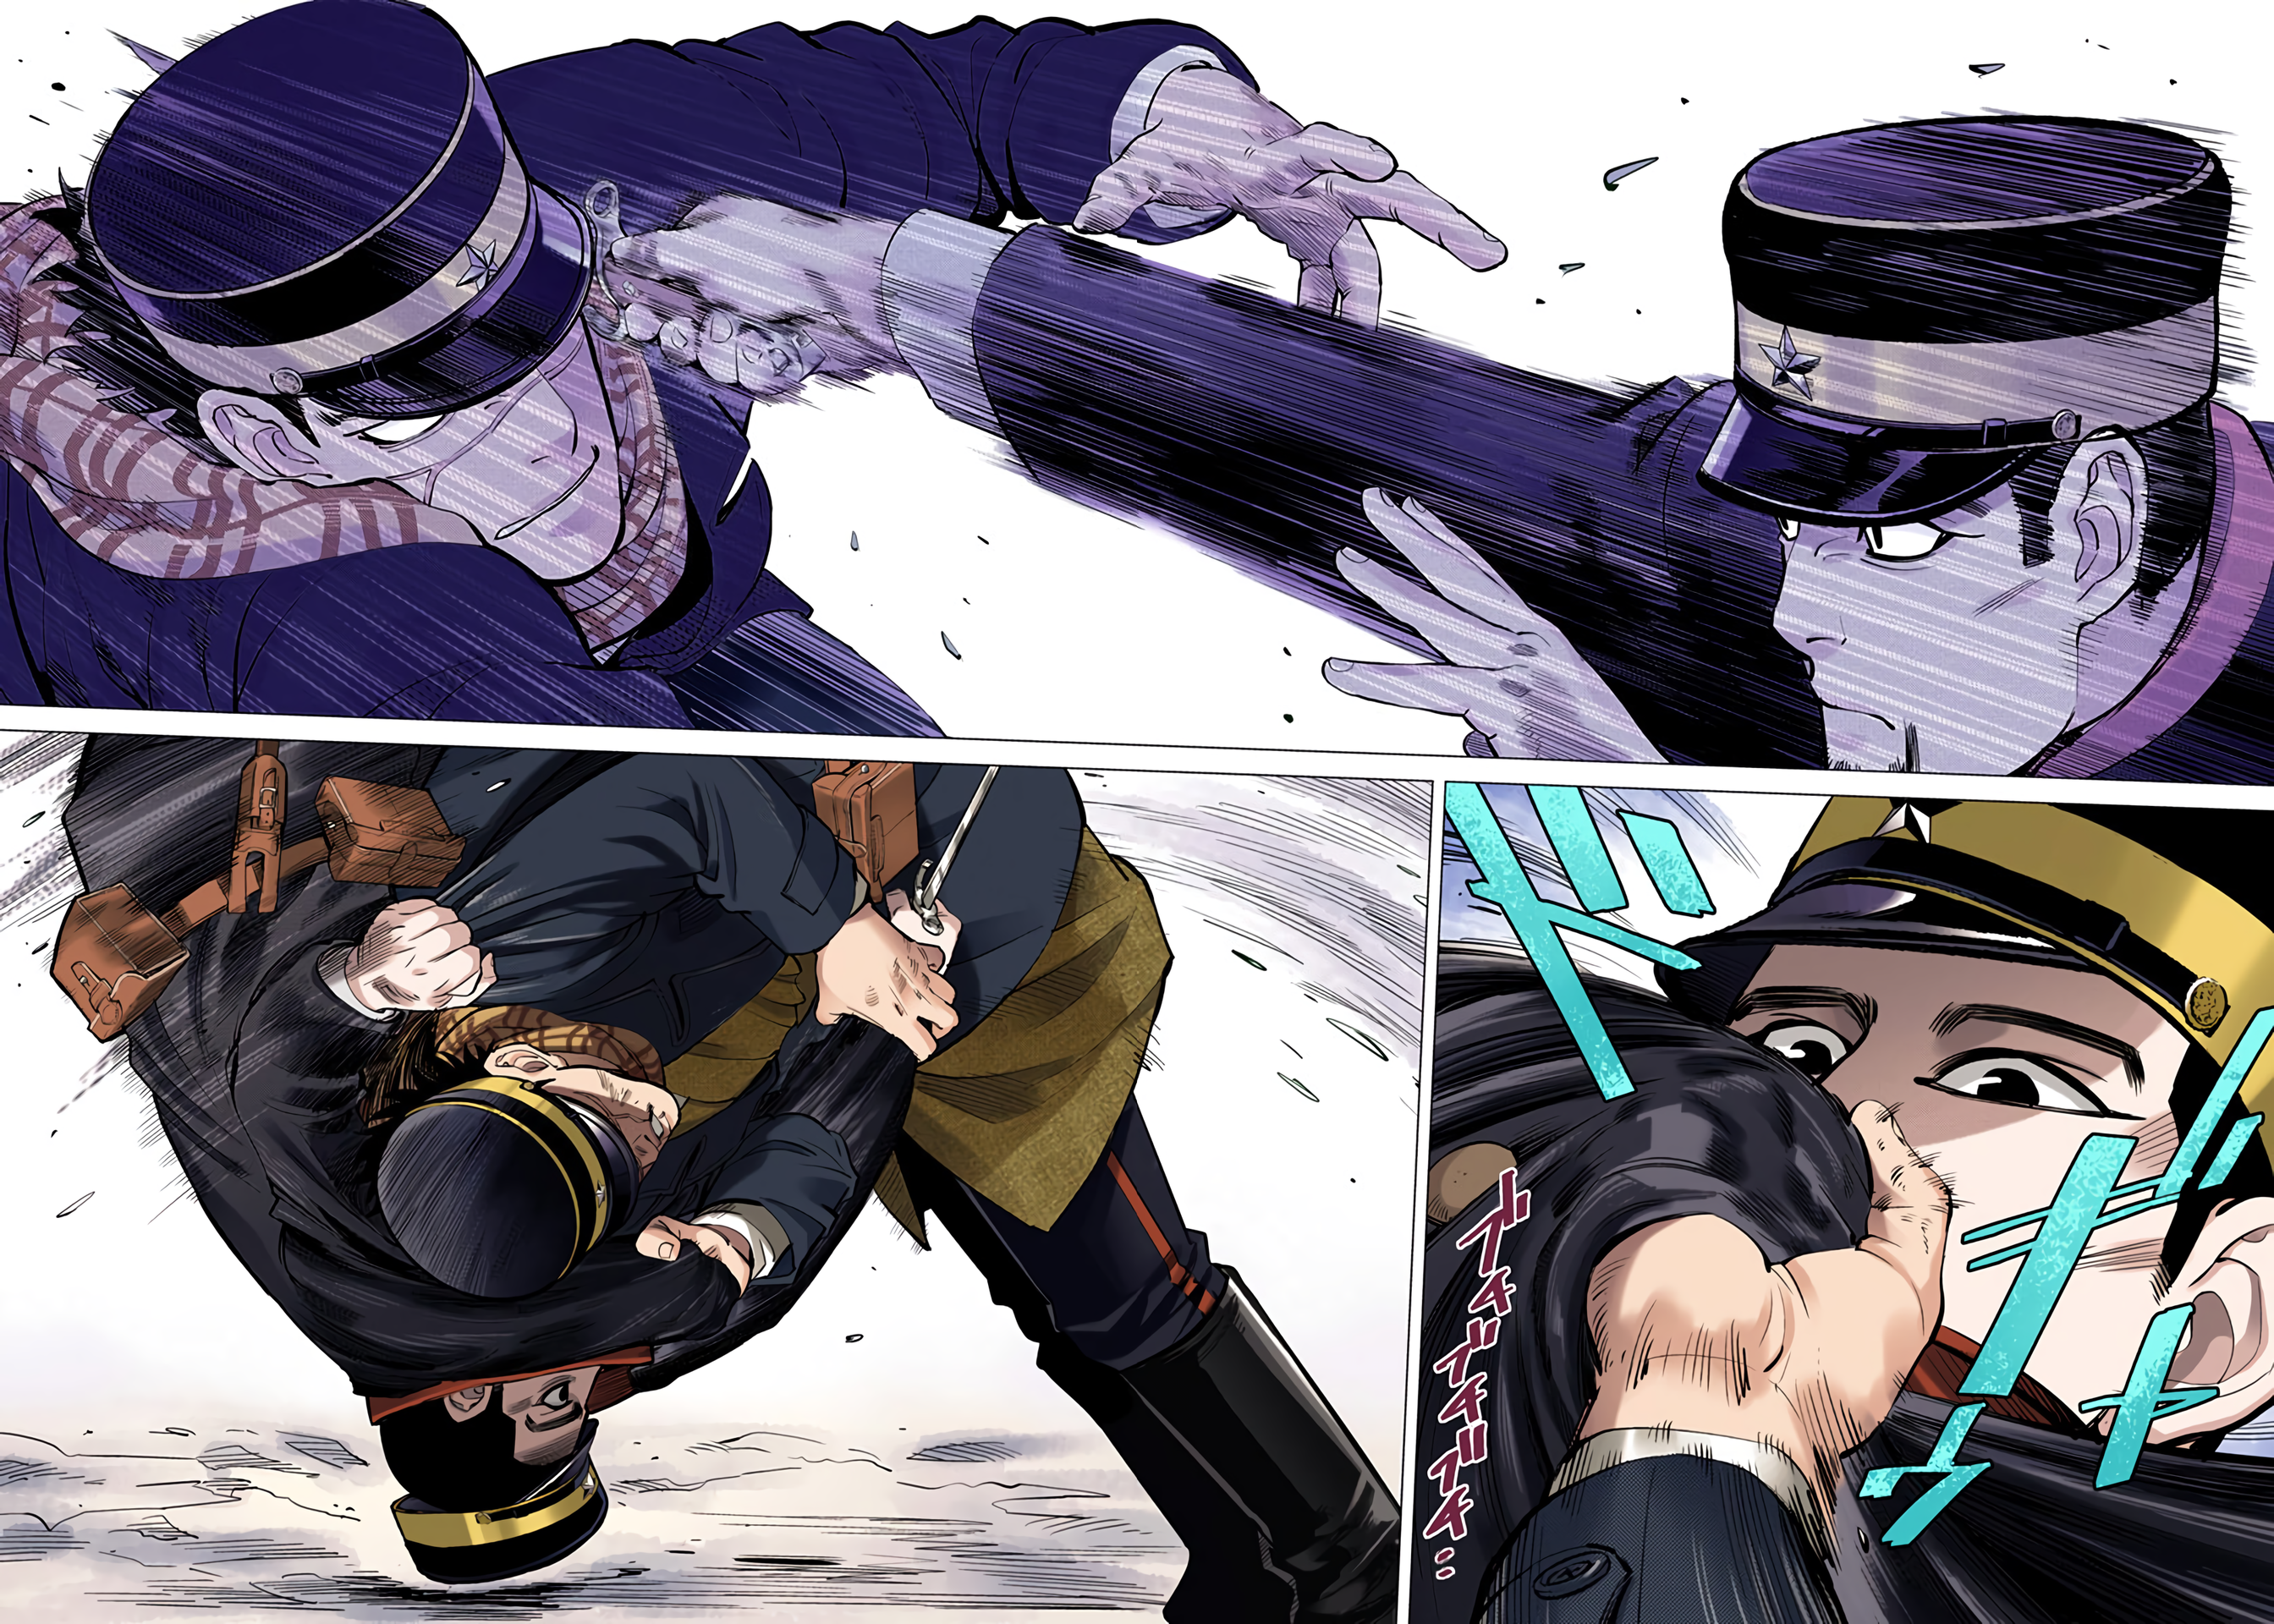 Golden Kamuy - Digital Colored Comics - Page 4